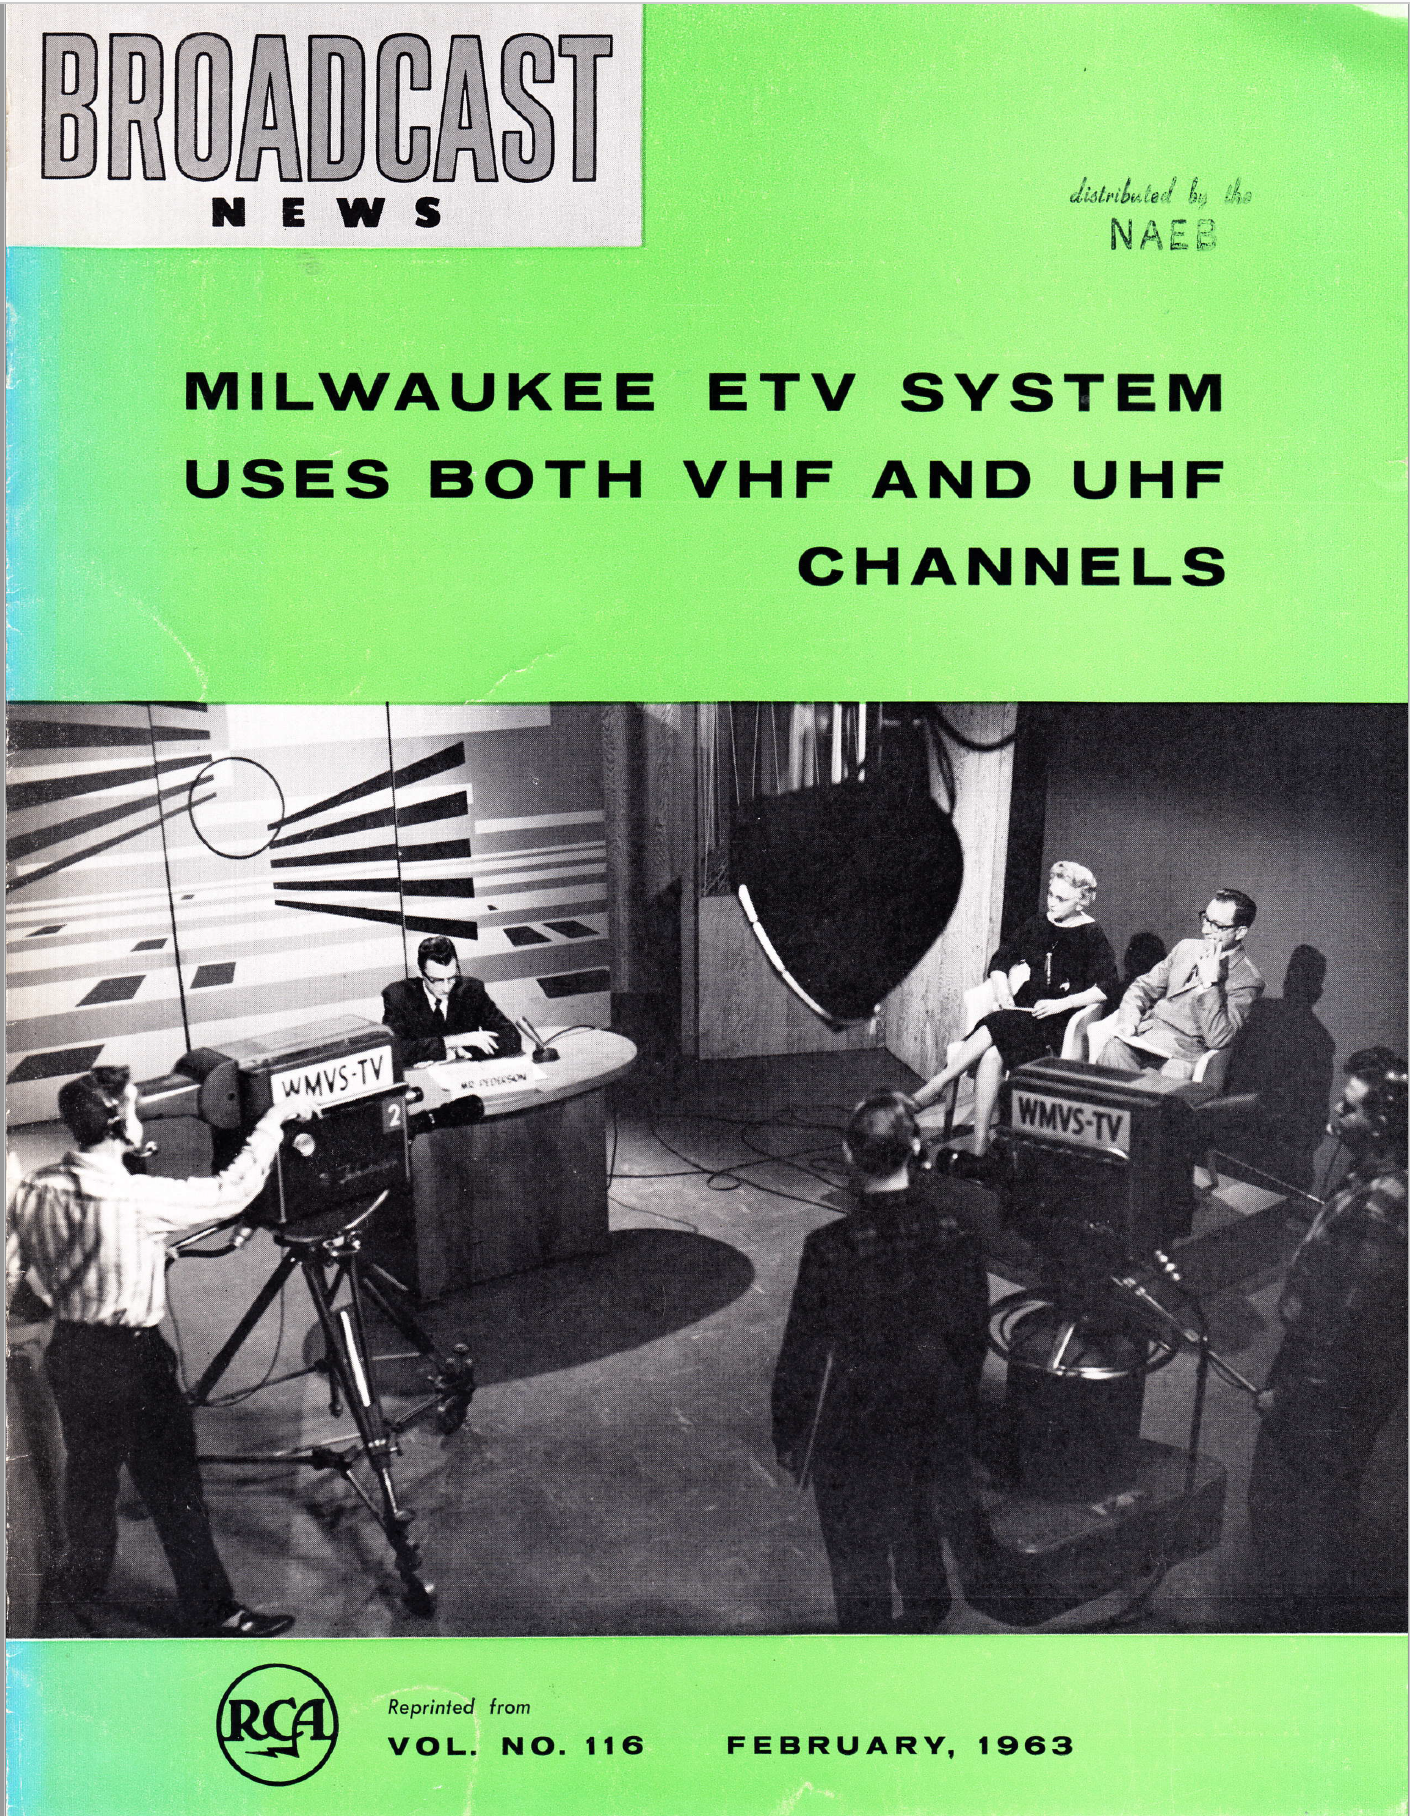 Broadcast News Catalog from 1963